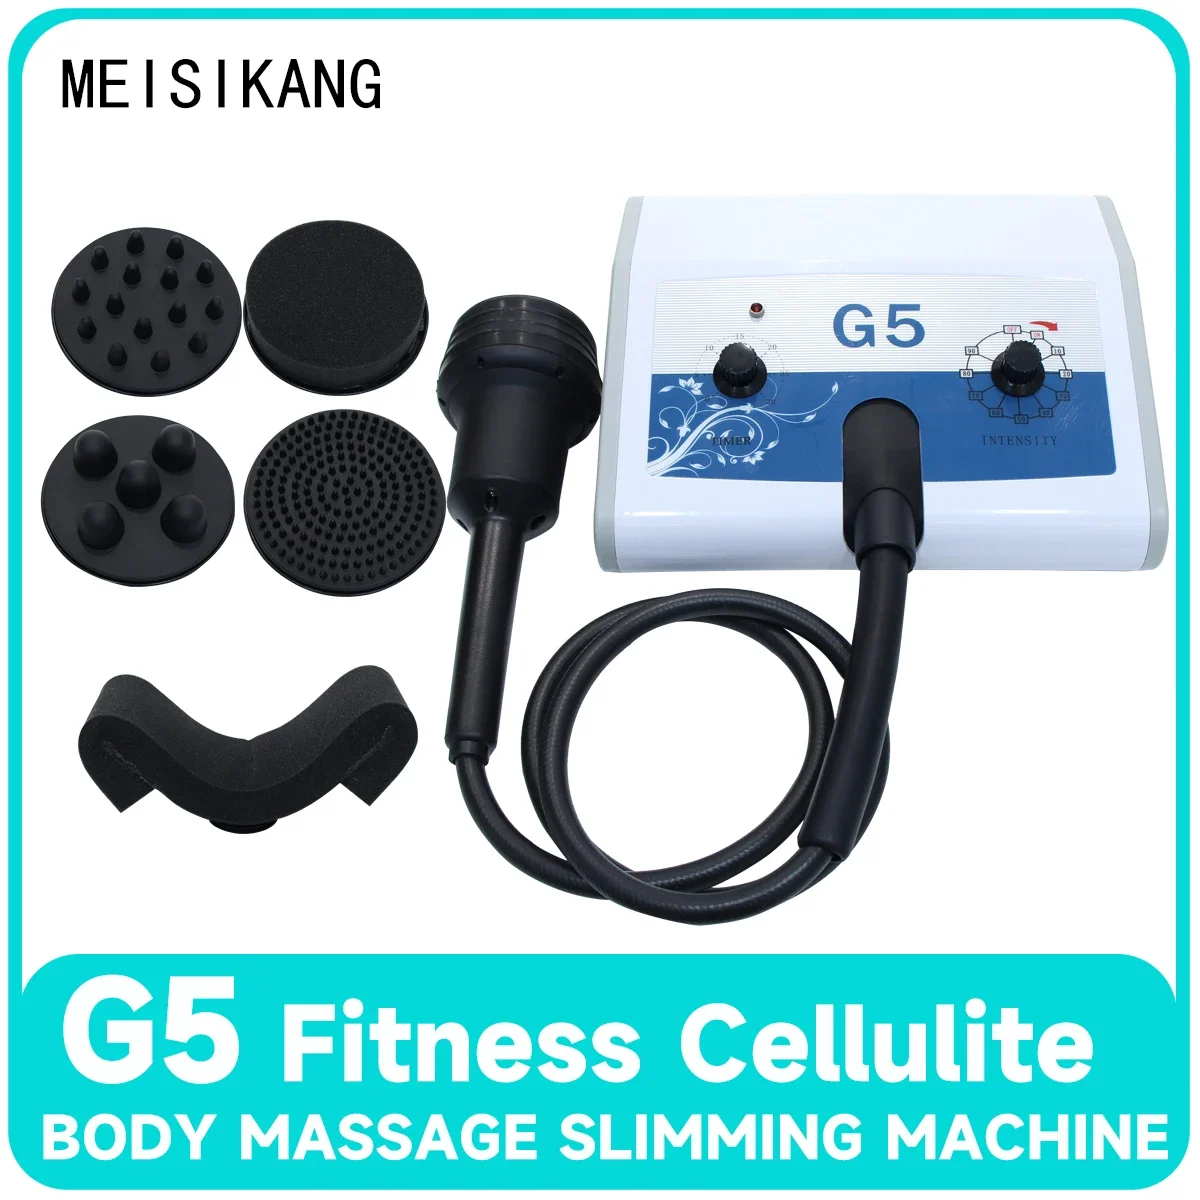 

High Frequency G5 Vibrating Body Slimming Machine Fitness cellulite Fat Reduce Shaping Massager Weight Loss Slimming Waist